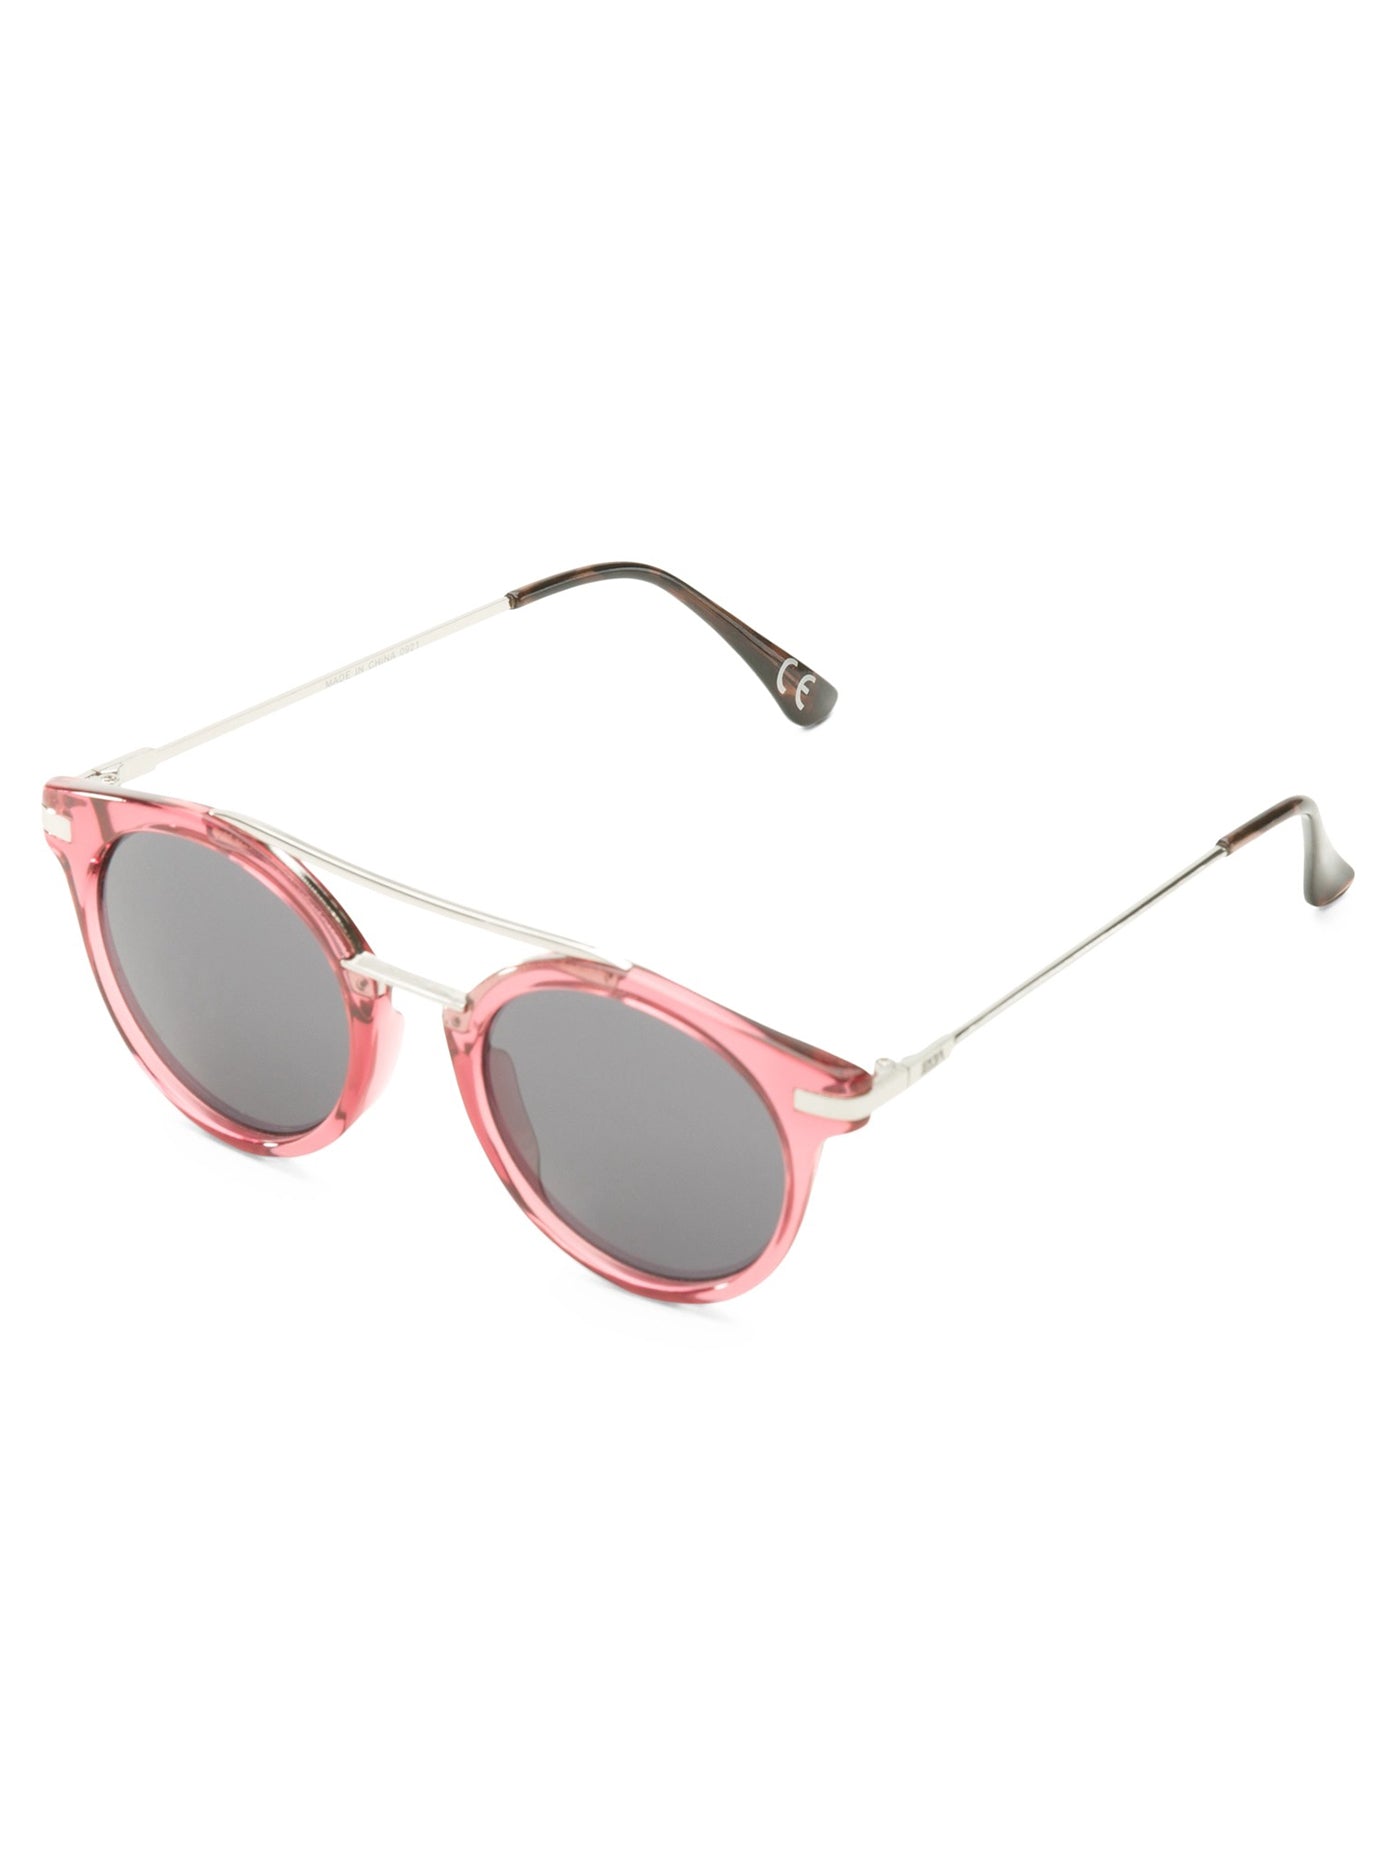 Vans In The Shade Sunglasses